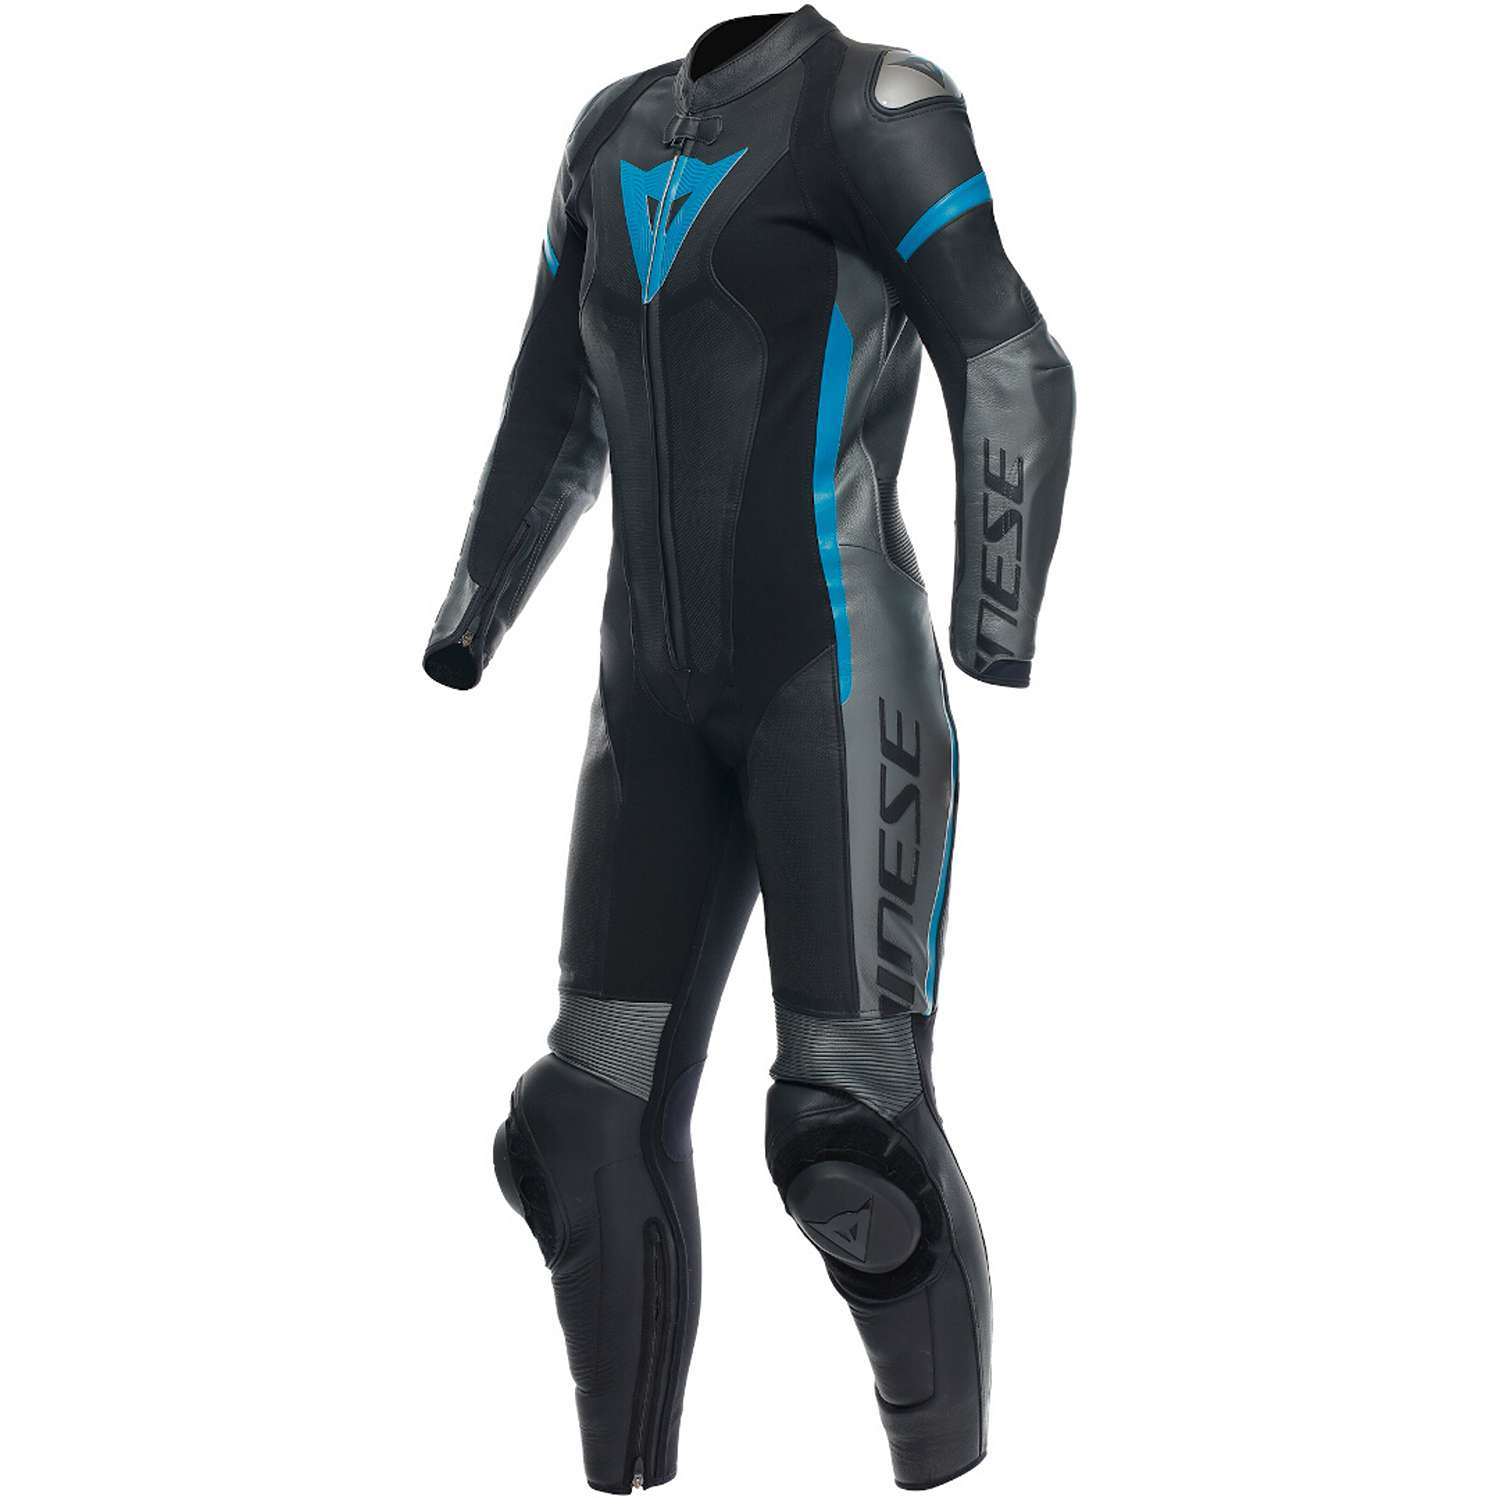 Image of Dainese Grobnik Lady Leather 1Pc Suit Perf Black Anthracite Teal Size 44 ID 8051019498168